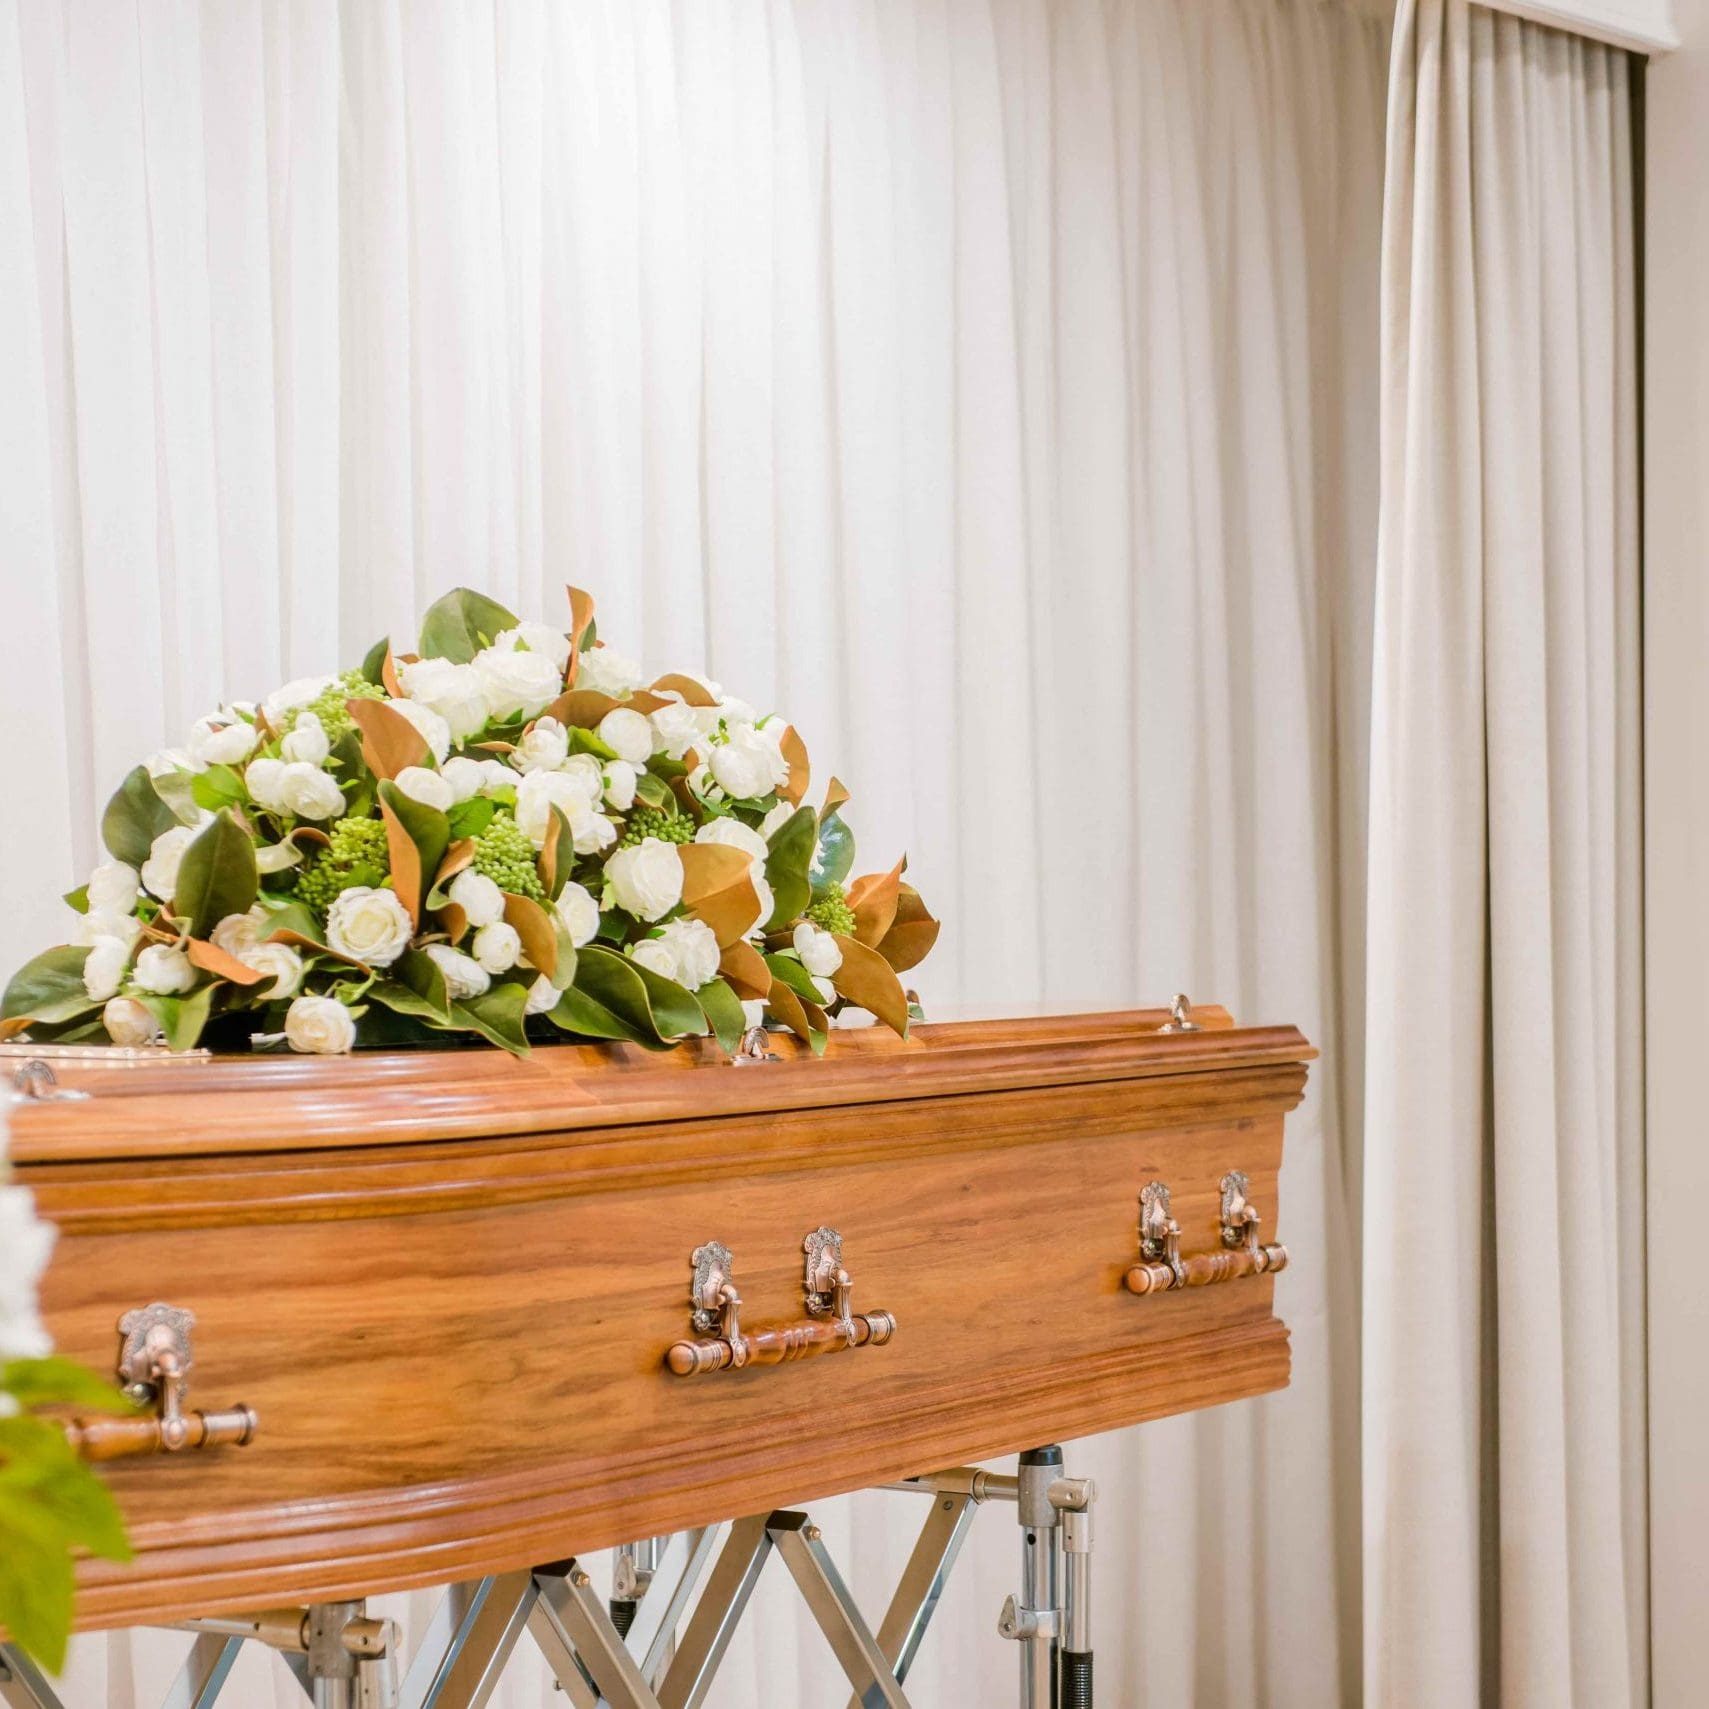 Sydney funeral coffin with flowers